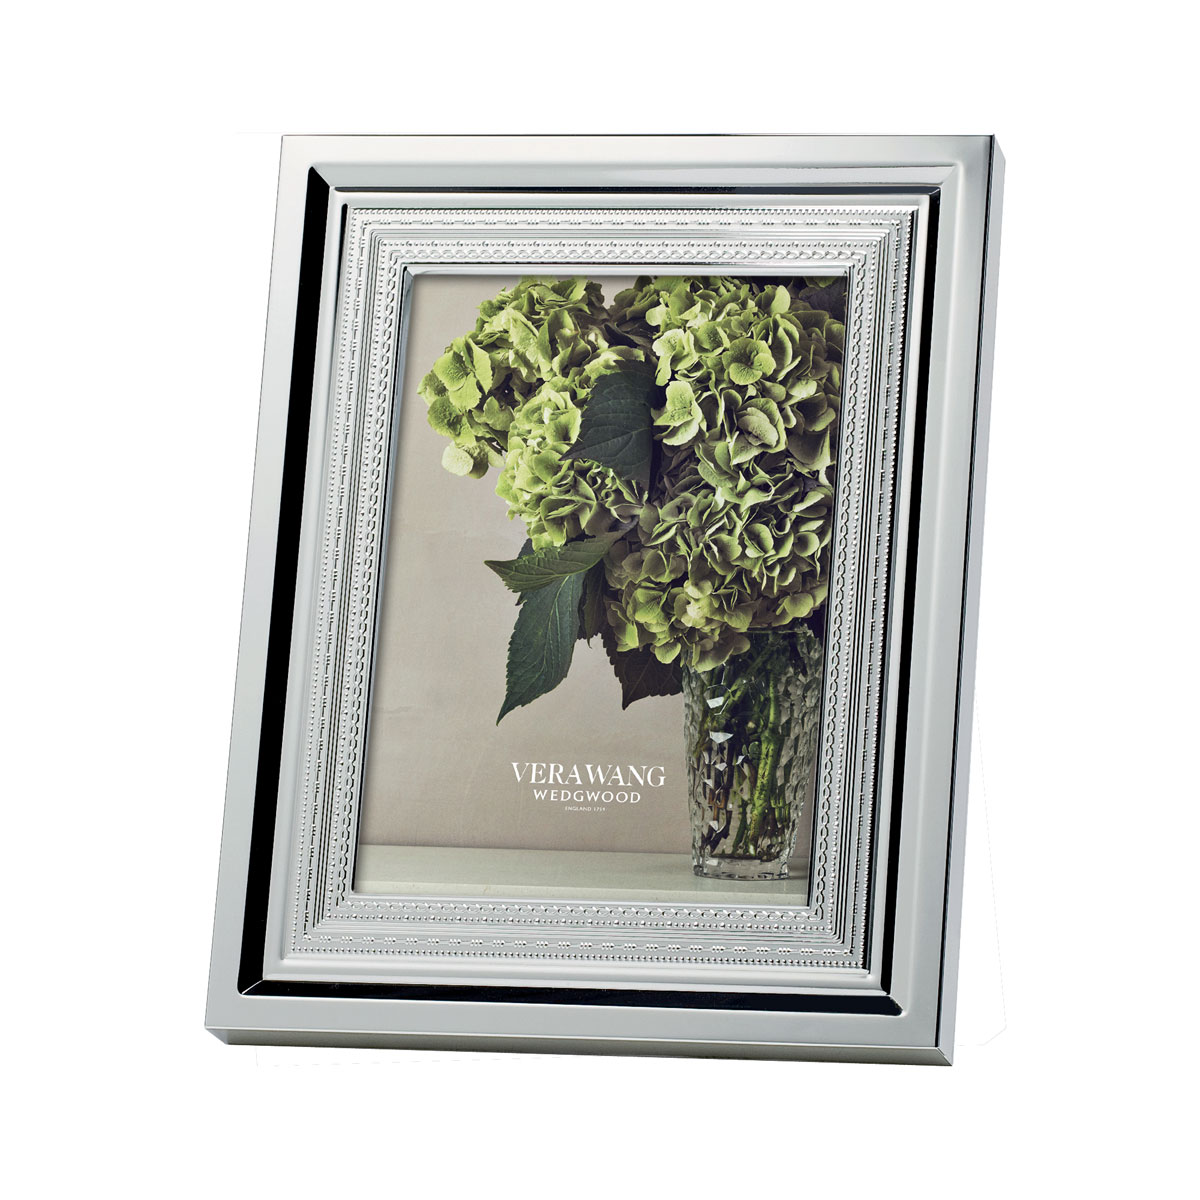 Vera Wang Wedgwood With Love Silver 4x6" Picture Frame